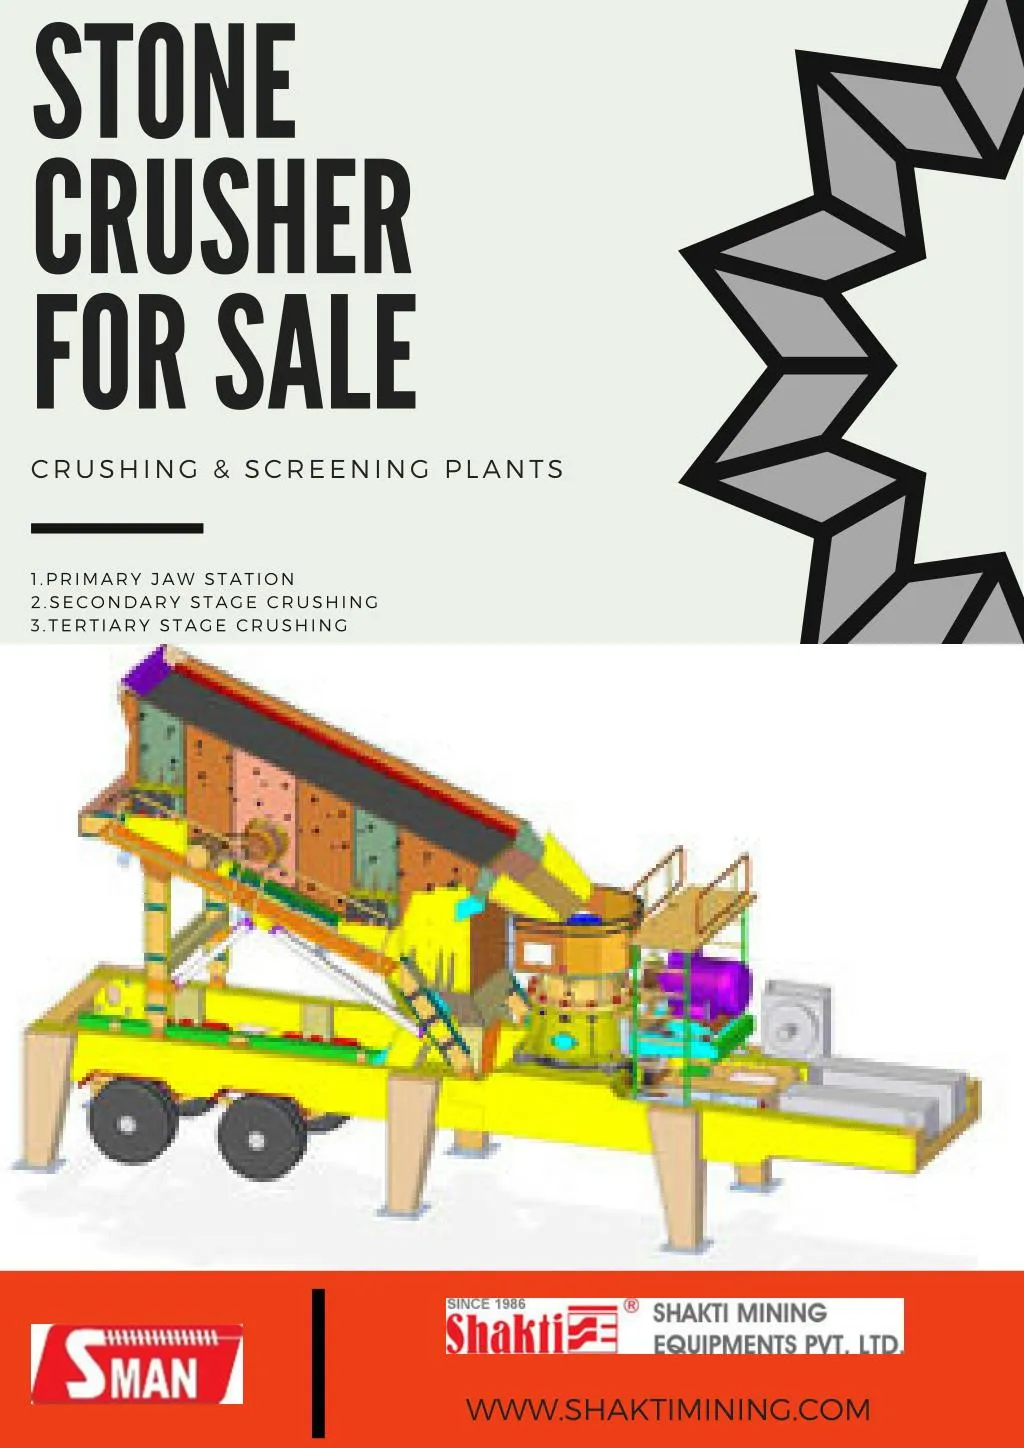 stone crusher for s a le